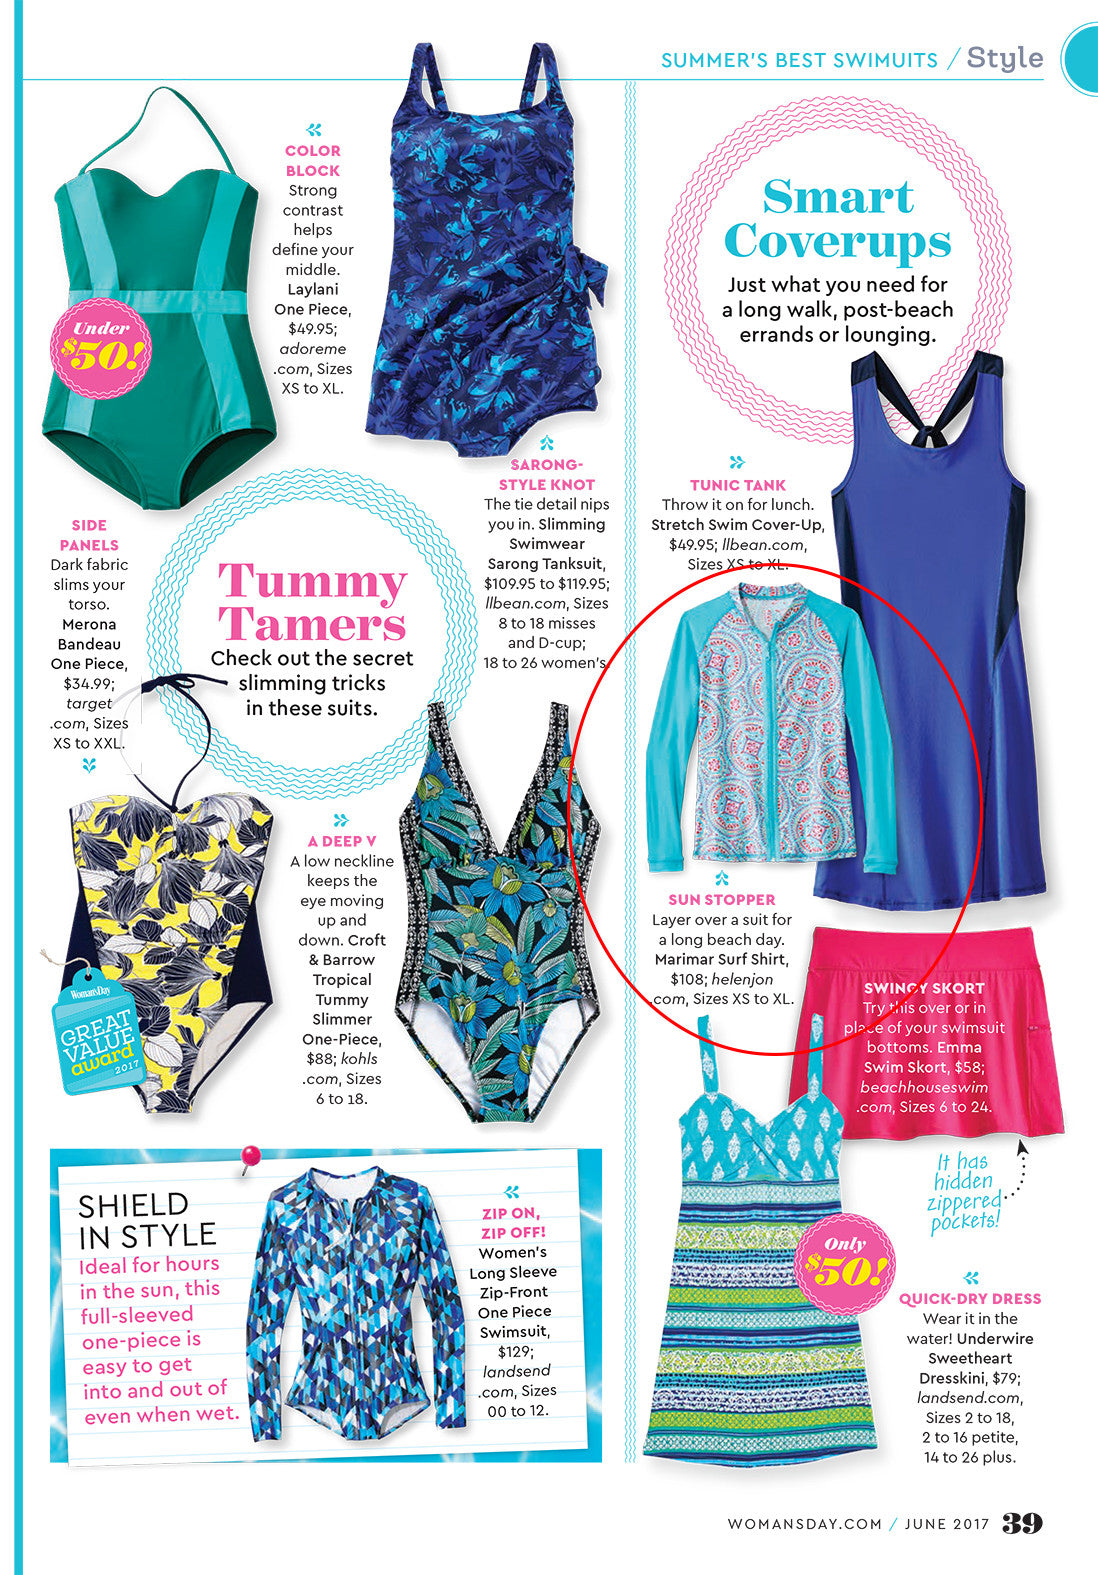 Woman's Day Swim feature